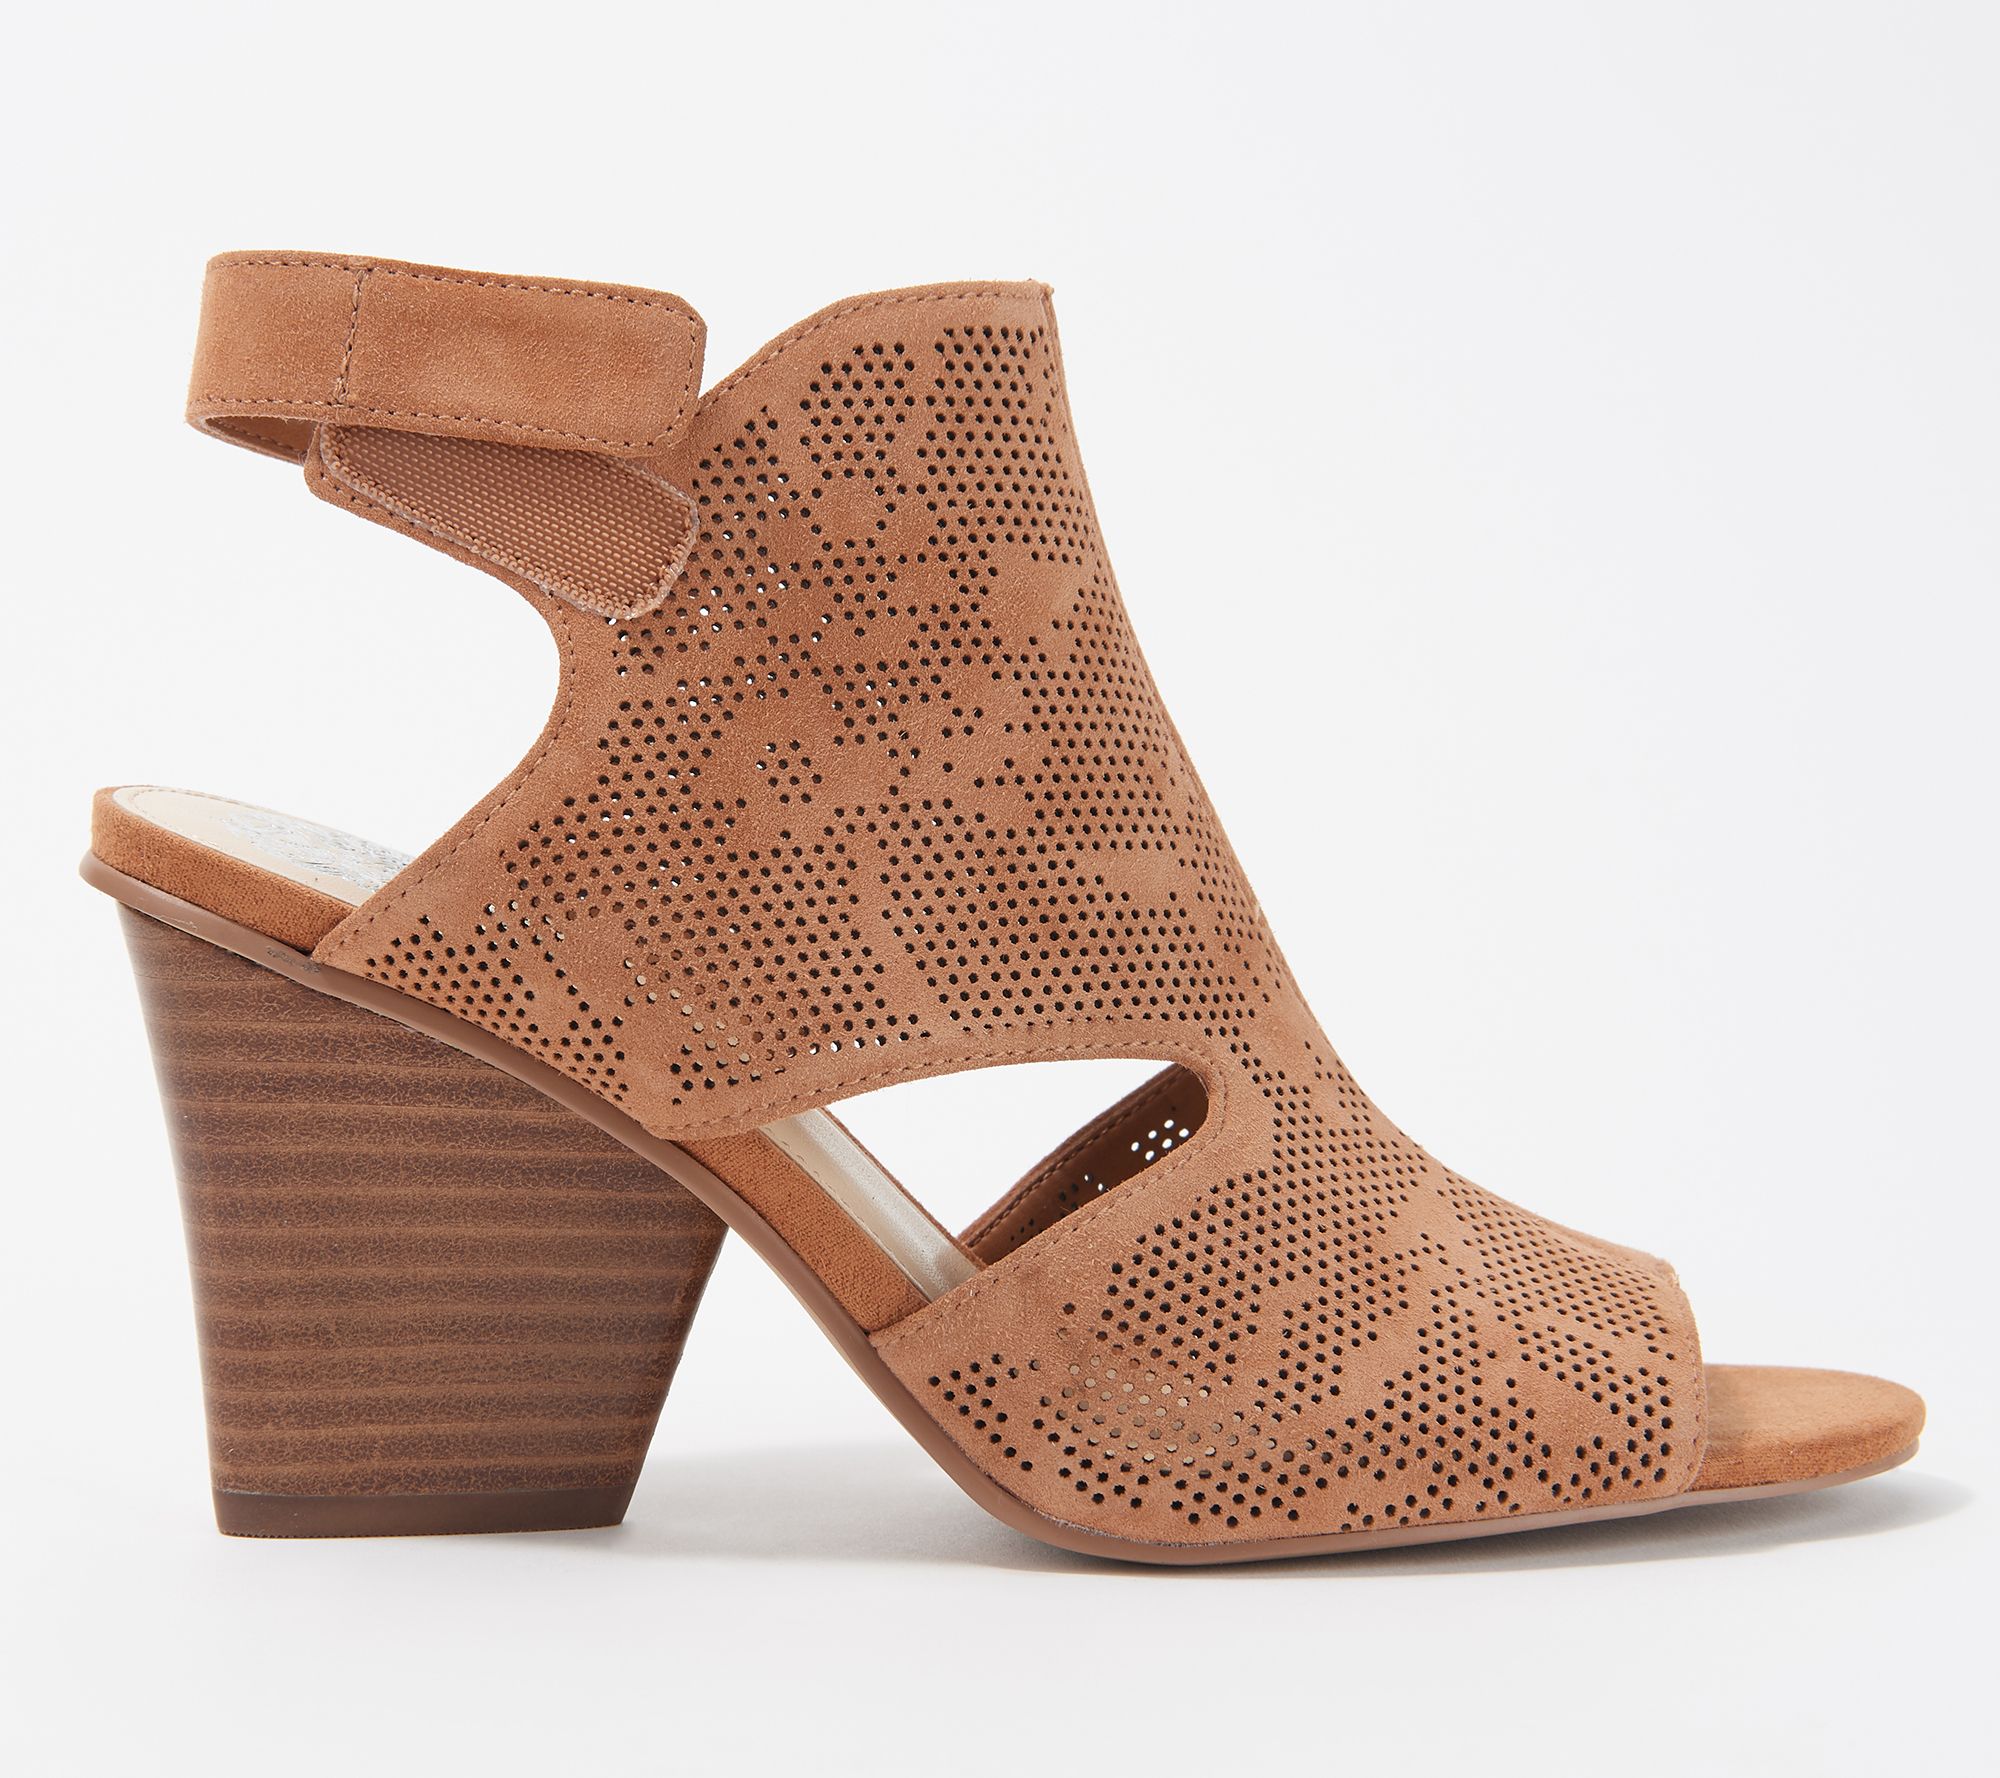 Vince Camuto Leather Detailed Heeled Sandals - Dachelle - QVC.com